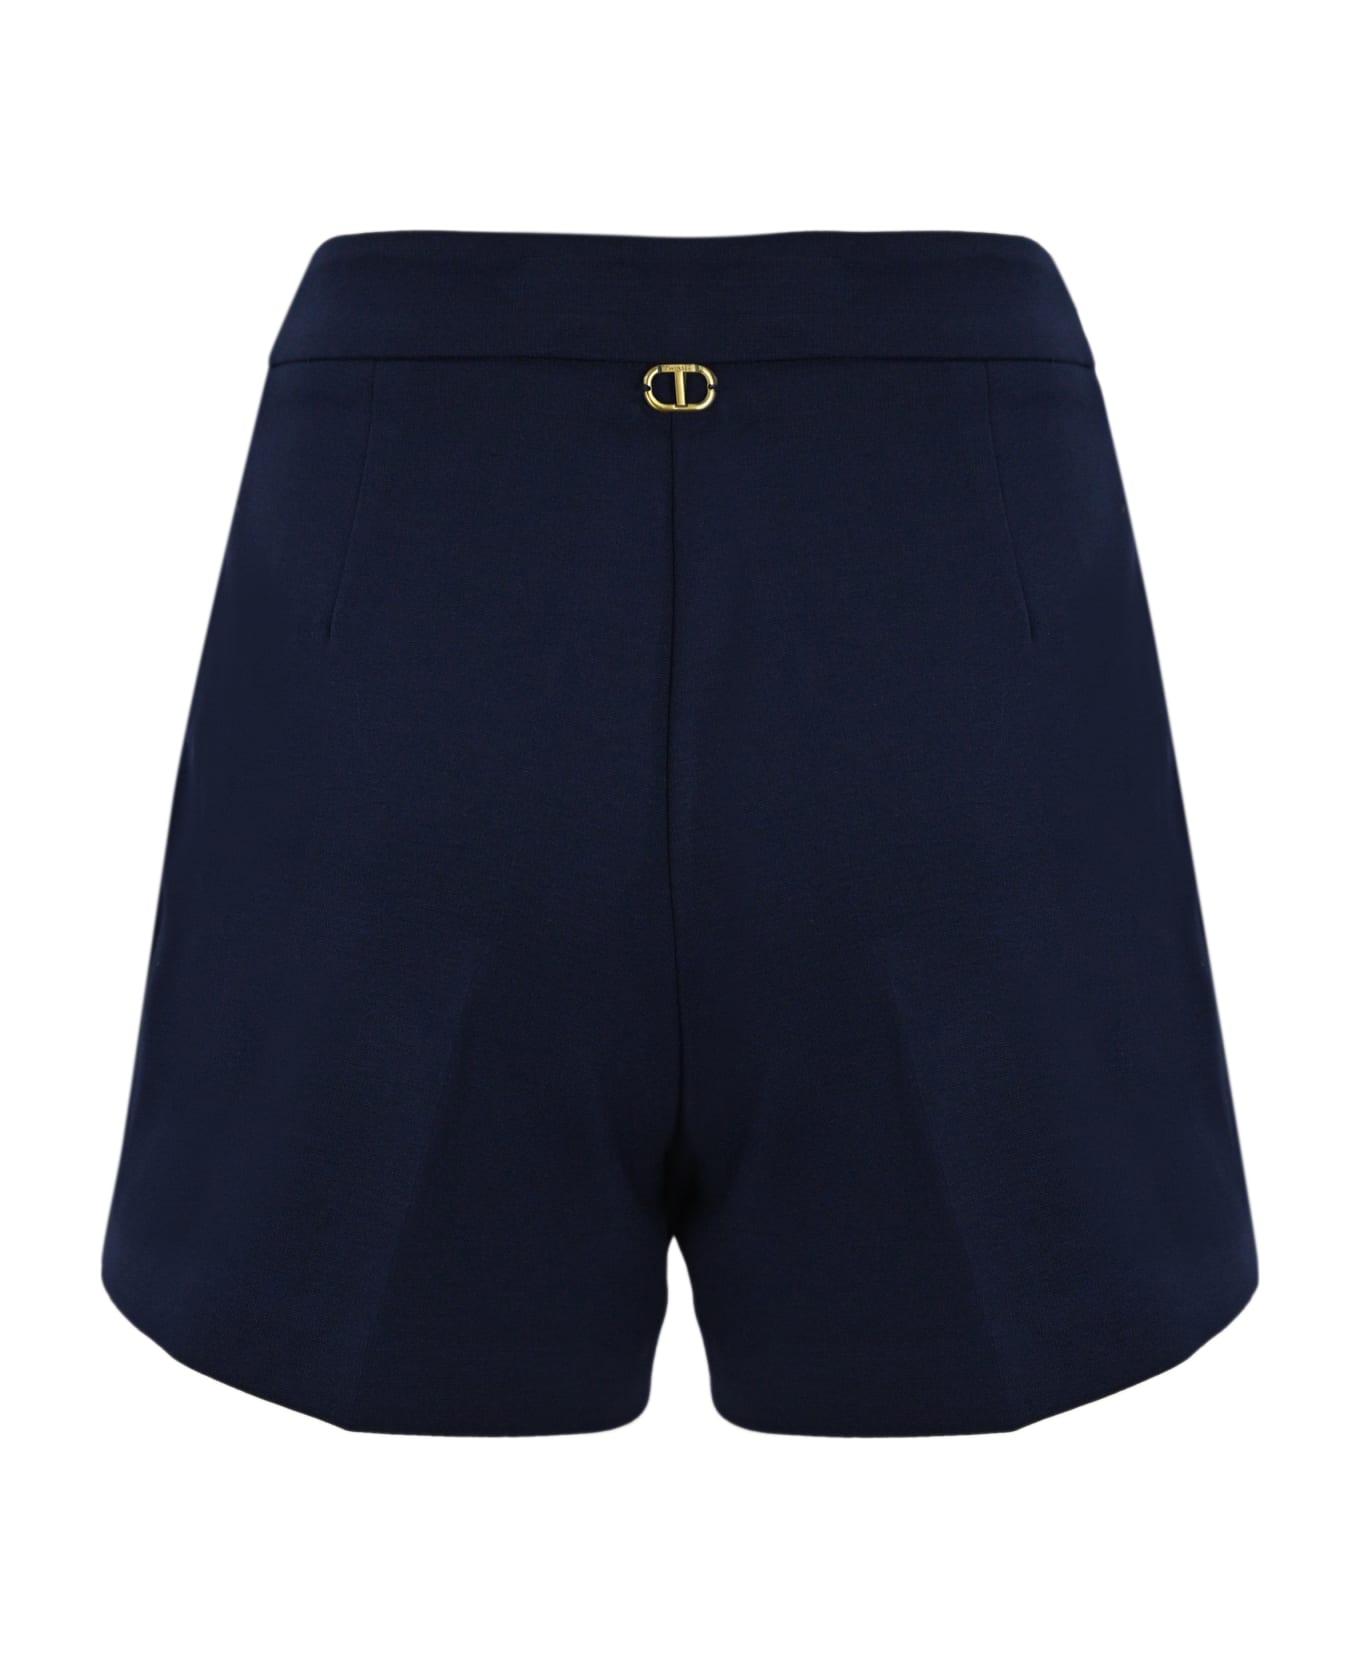 TwinSet Oval T Button Shorts - MID BLU ショートパンツ